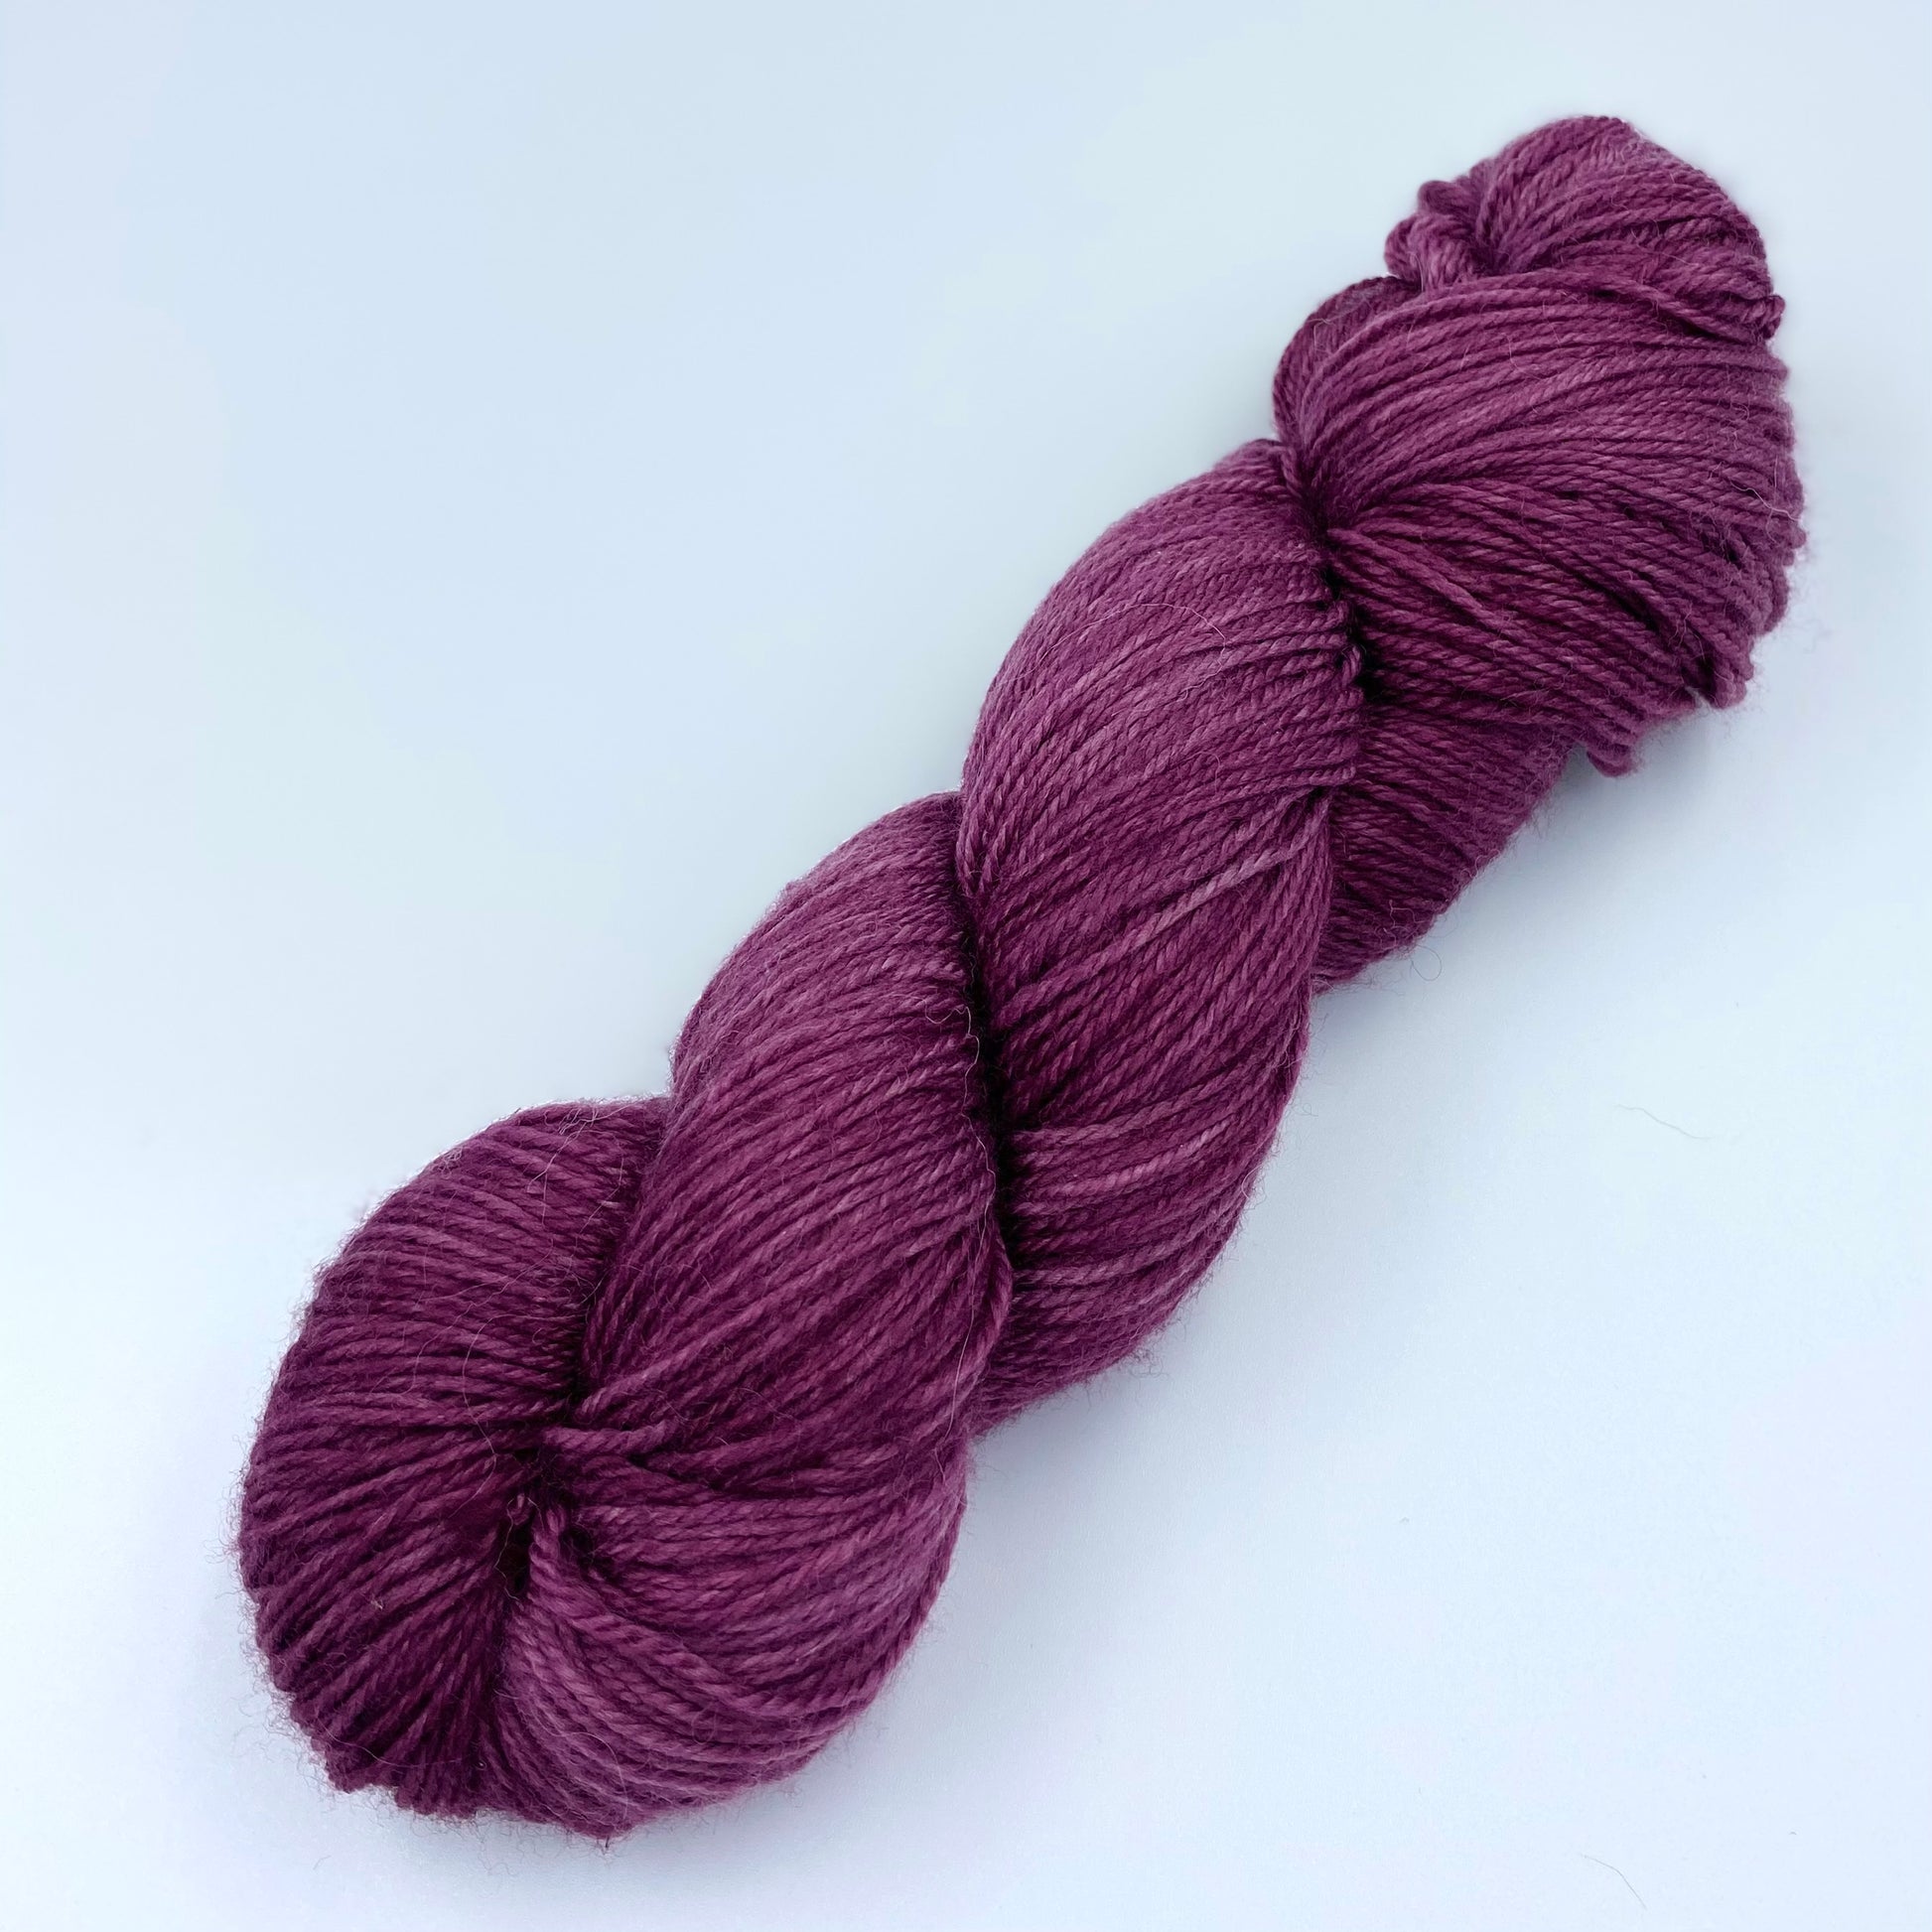 A skein of sparkly wool and nylon yarn hand dyed in the color deep mauve